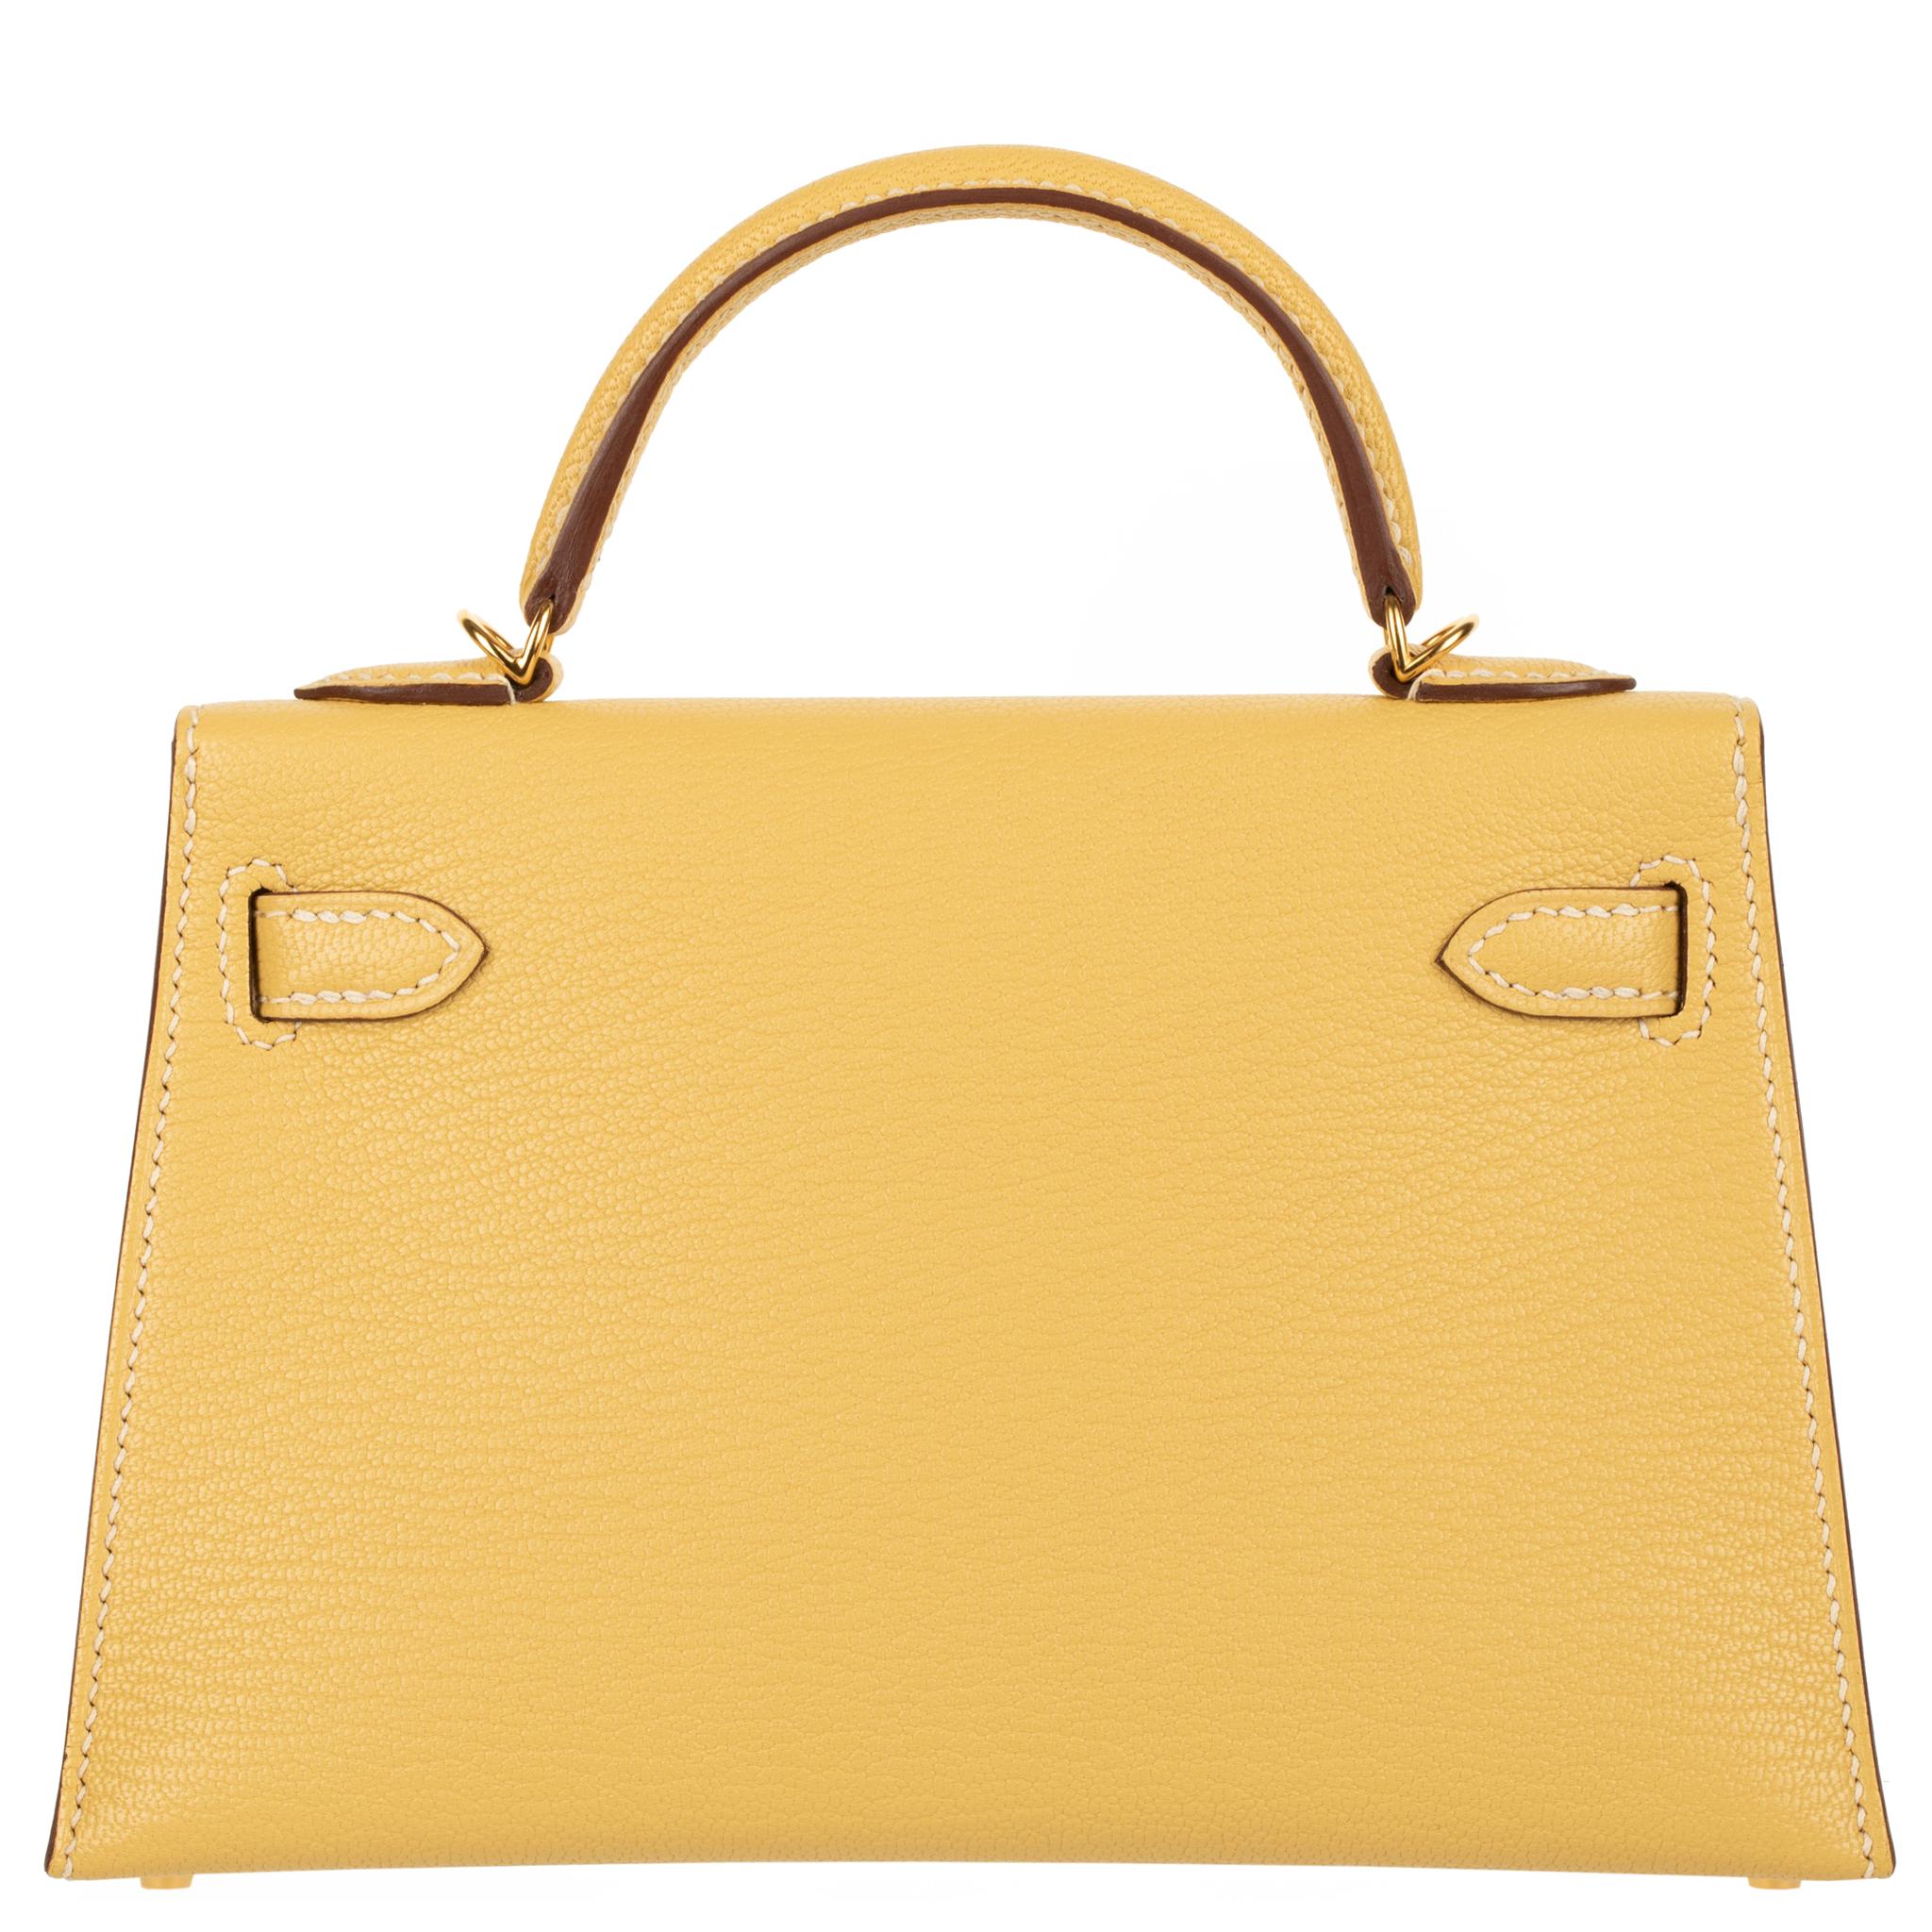 Hermès Mini Kelly II Foin Chevre Leather Gold Hardware In New Condition In Sydney, New South Wales